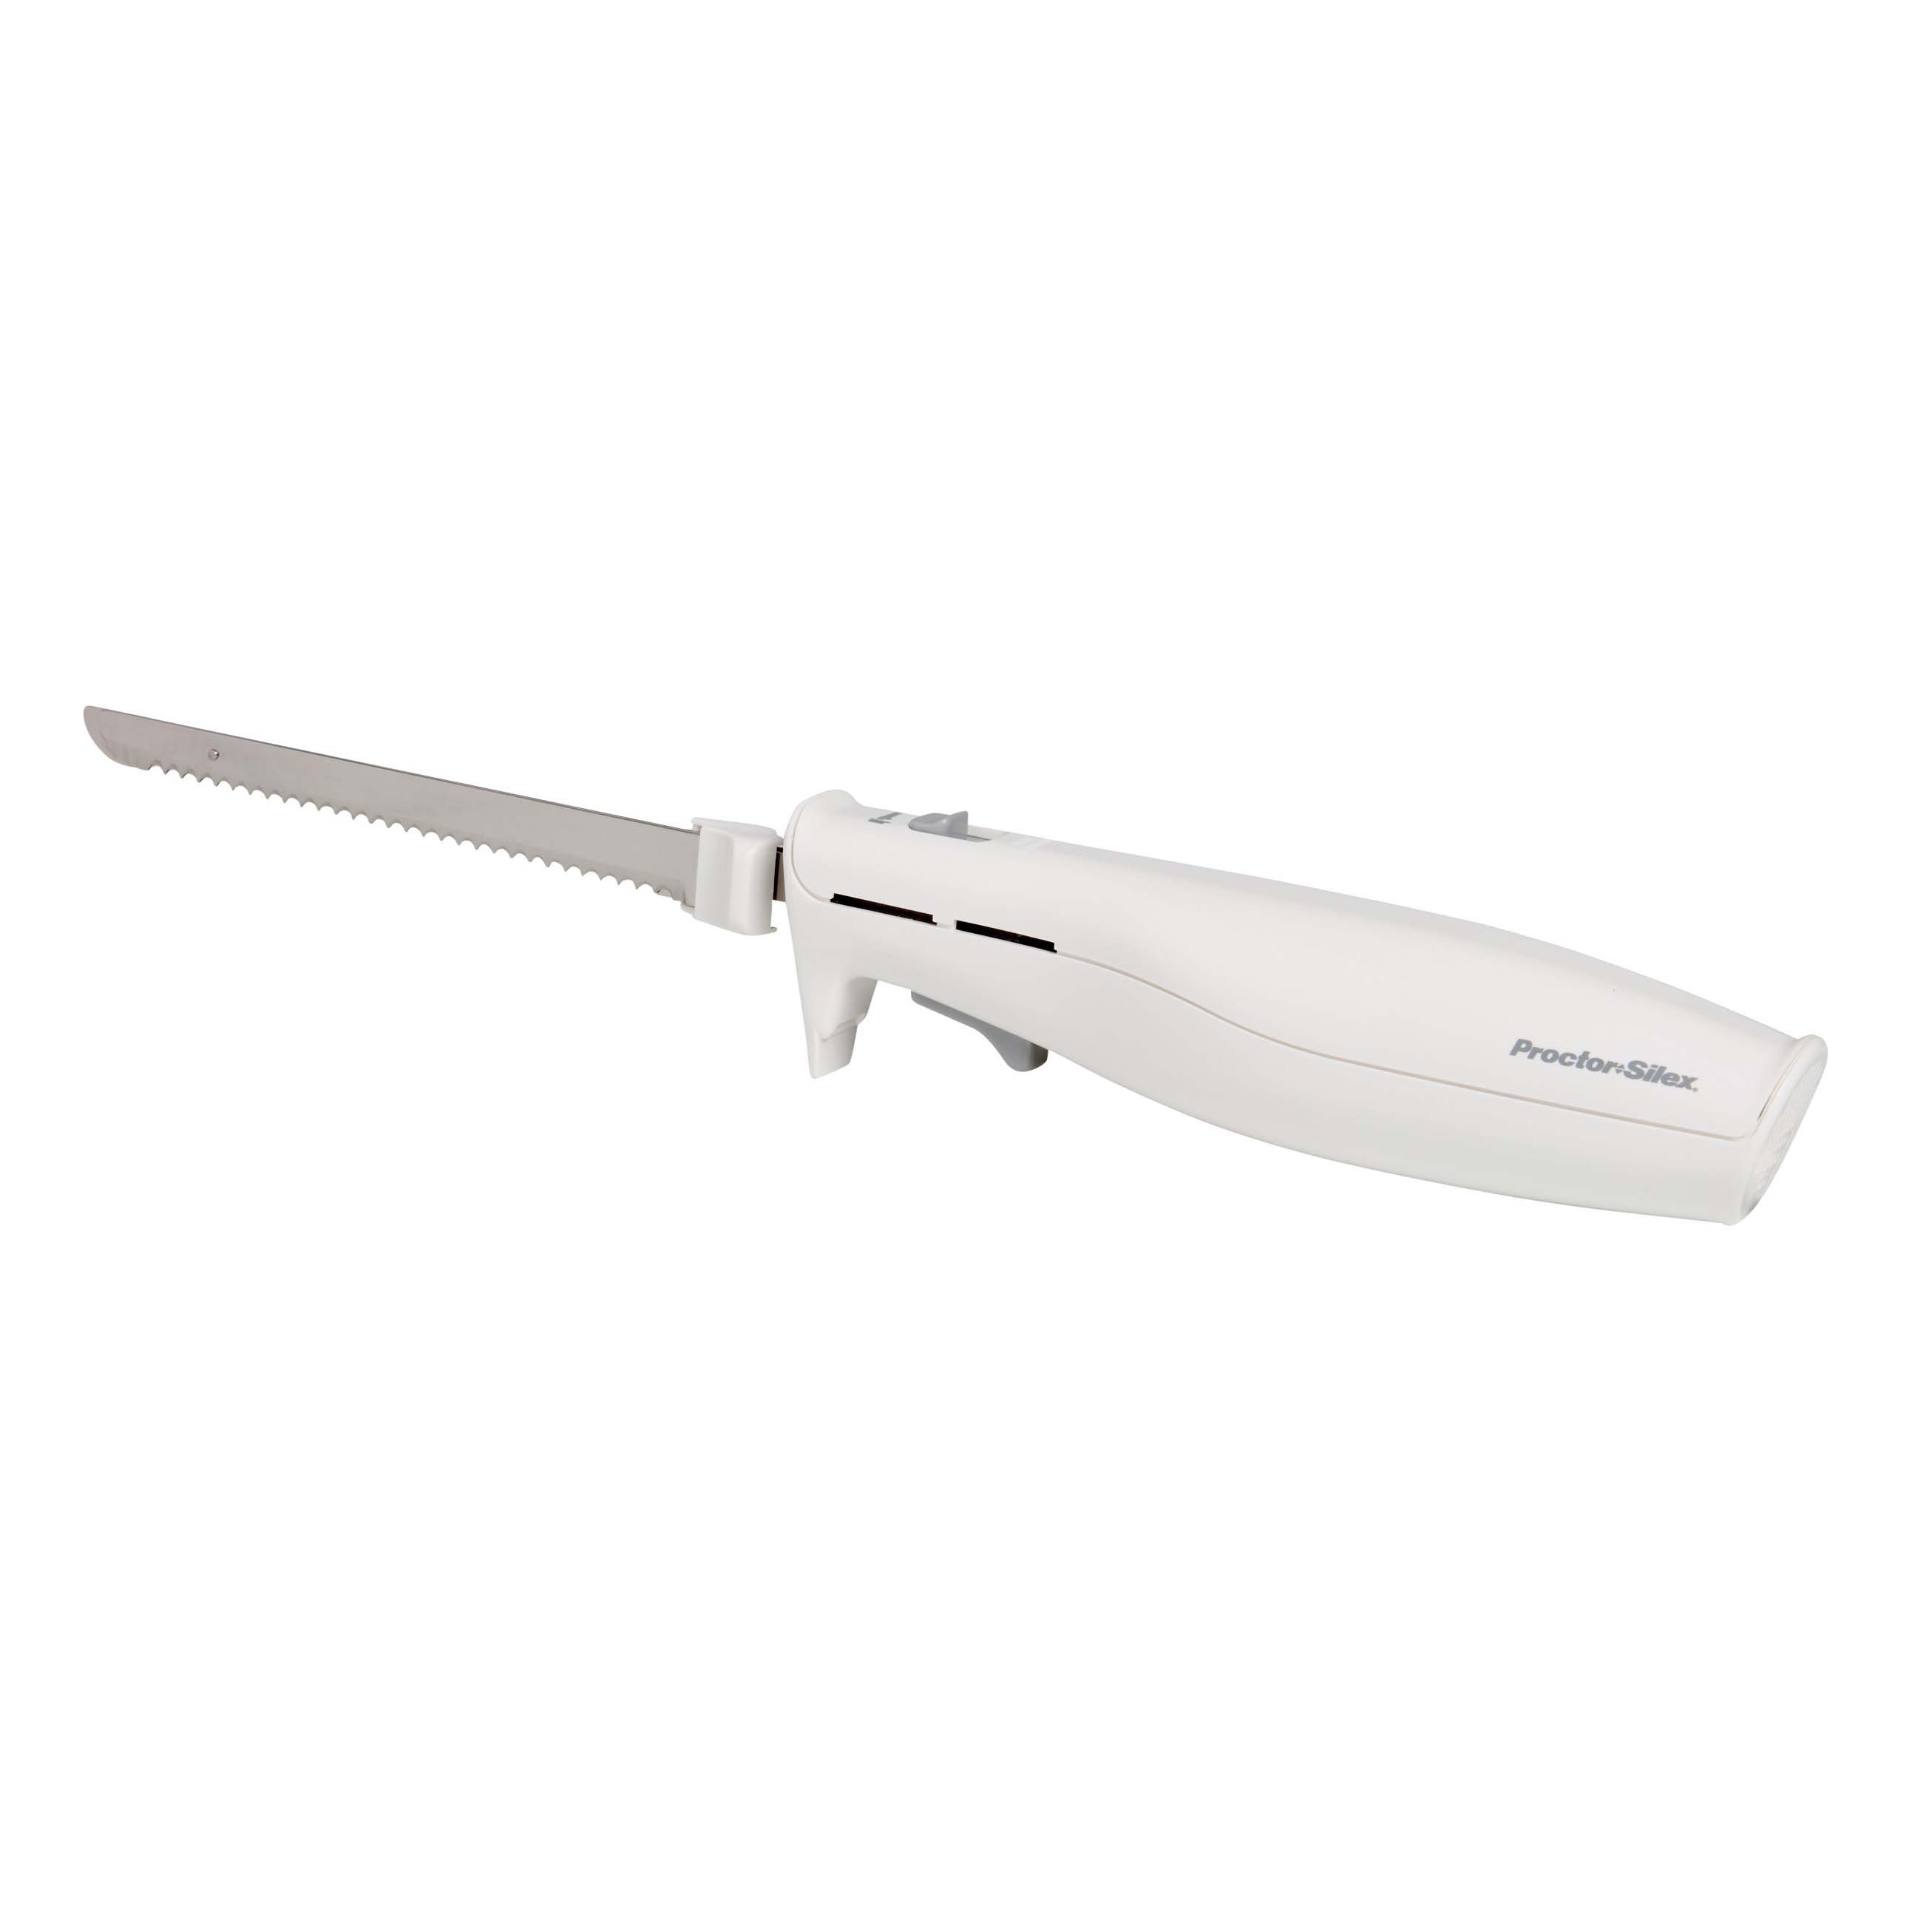 Proctor Silex Serrated Blade Electric Knife - White